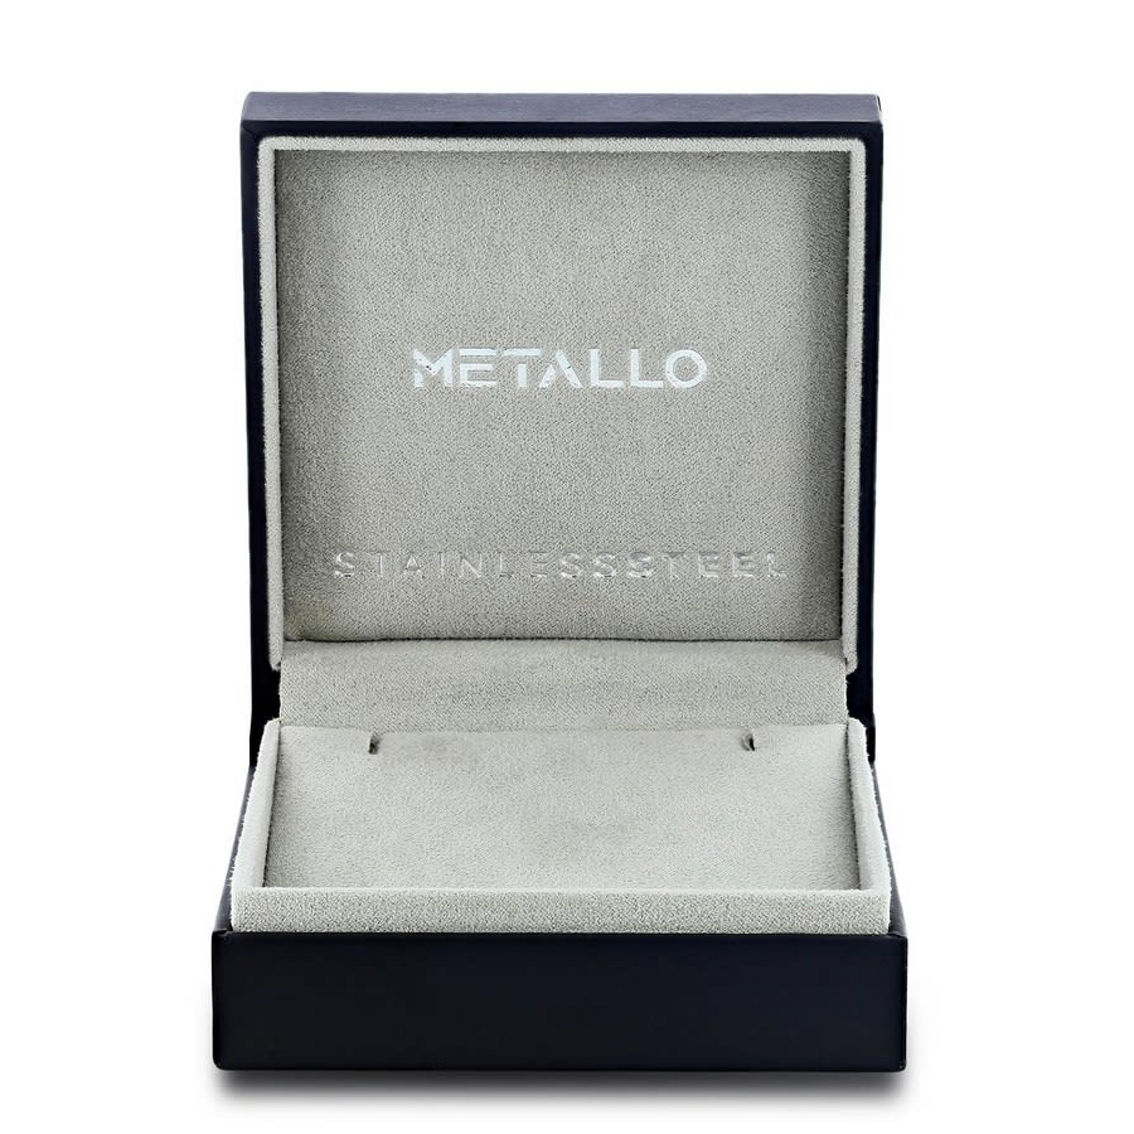 Metallo Stainless Steel CZ Dog Tag ID Necklace - Gold Plated - Image 2 of 3